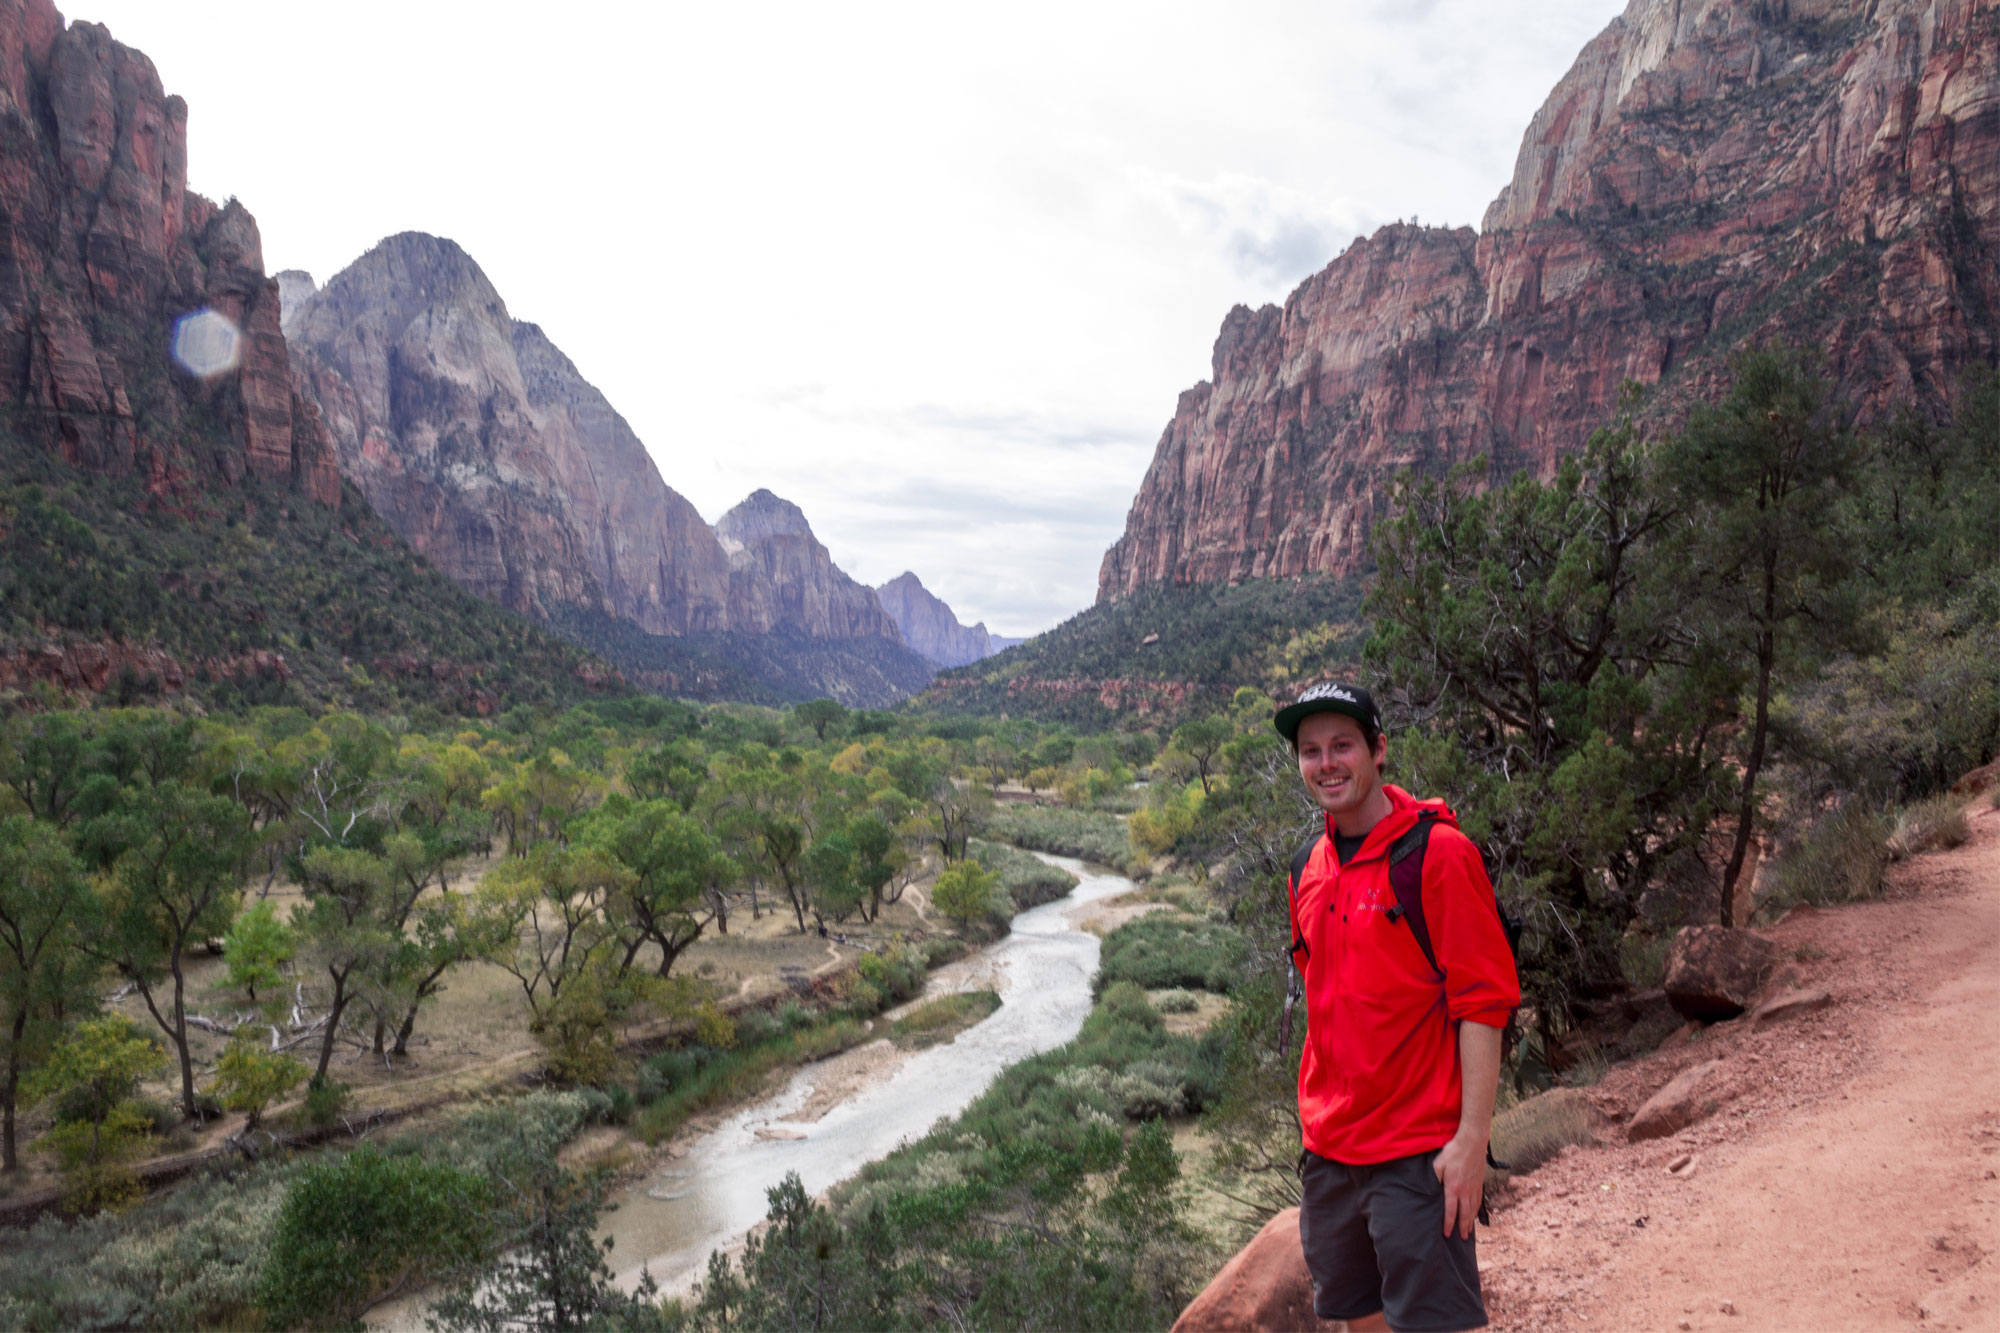 View of the canyon from Emerald Pool Trail - One of the best Zion National Park Hikes